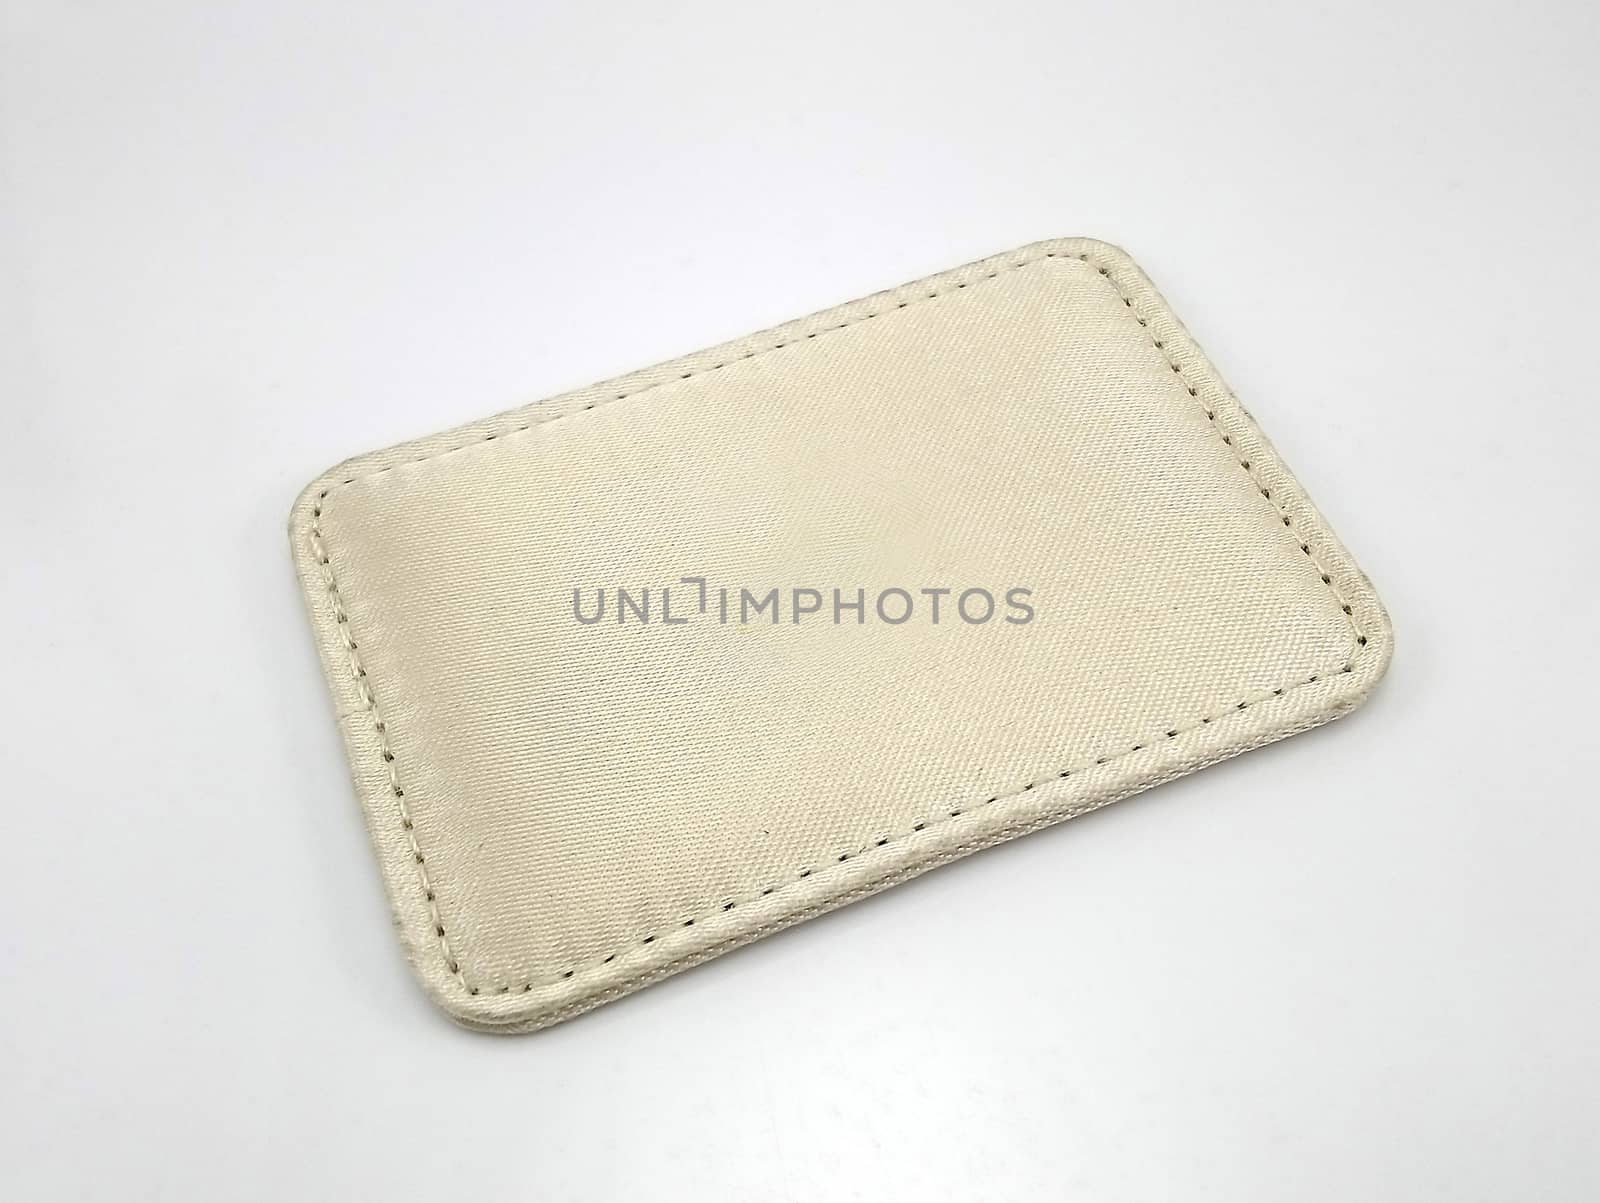 Light brown portable leather mirror case by imwaltersy